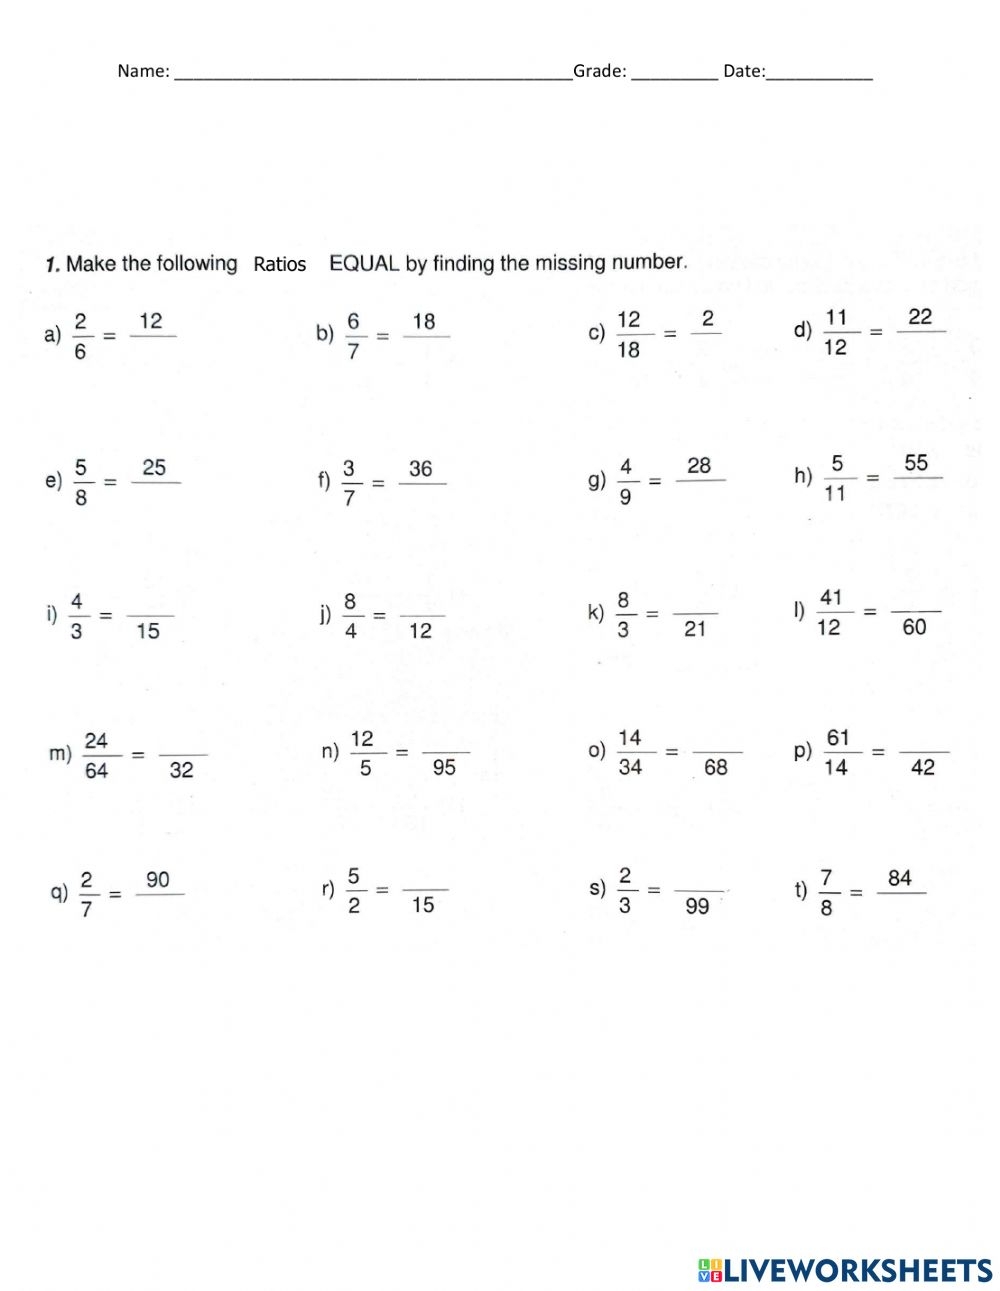 equivalent-ratios-online-exercise-math-worksheet-answers